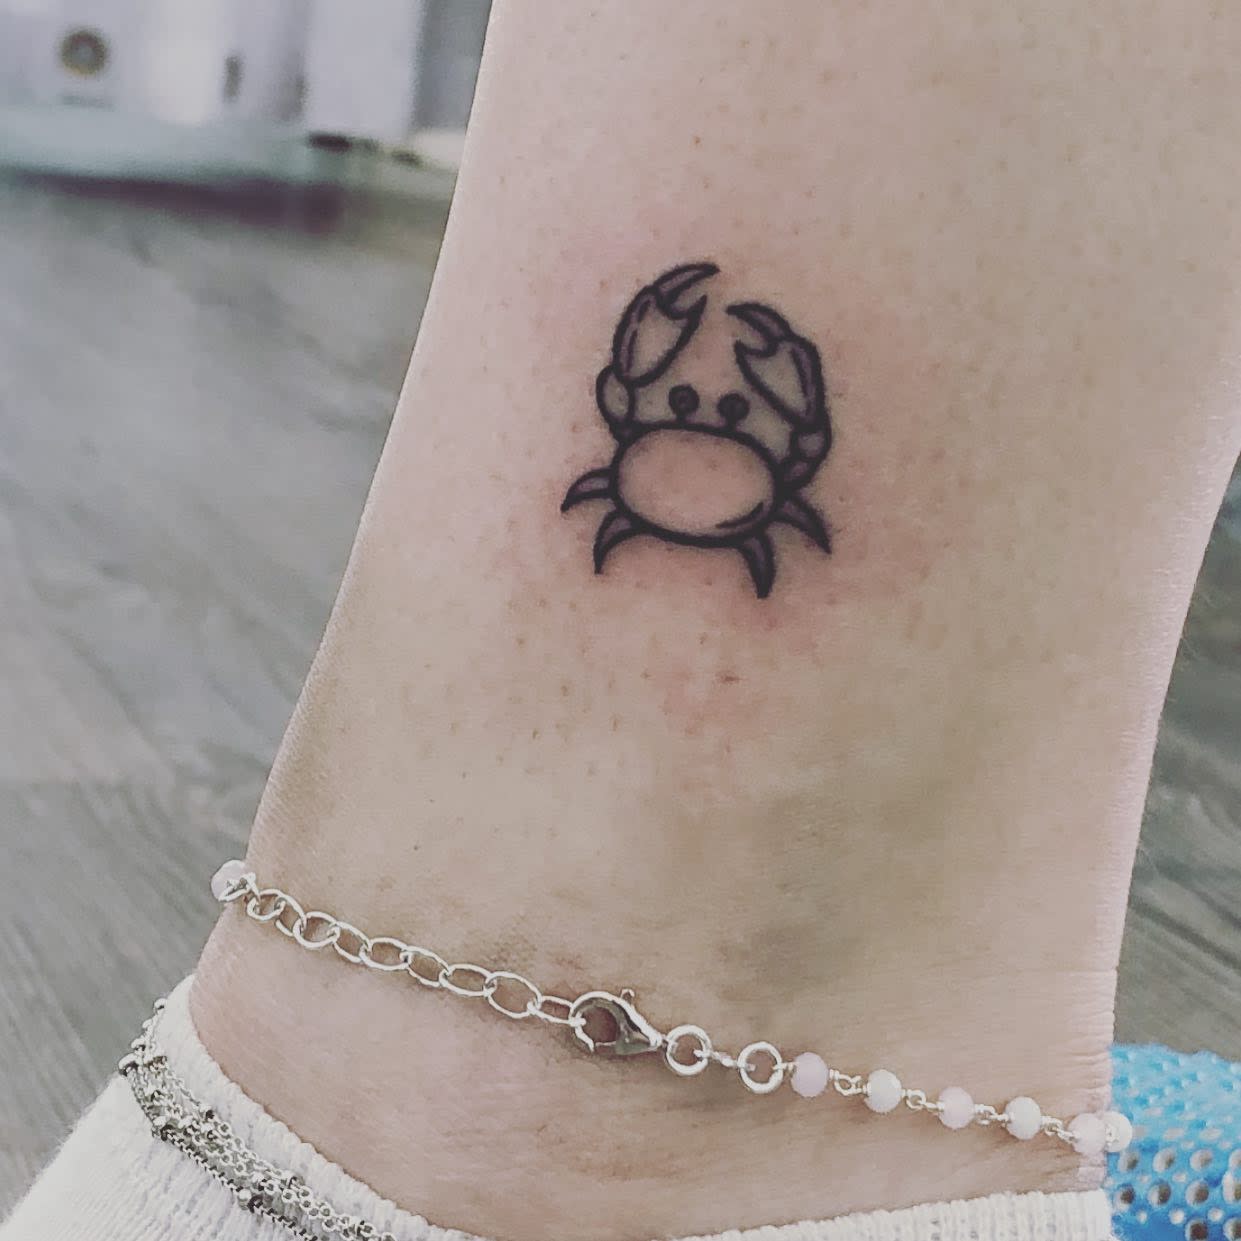 Hand poked crab tattoo on the ankle